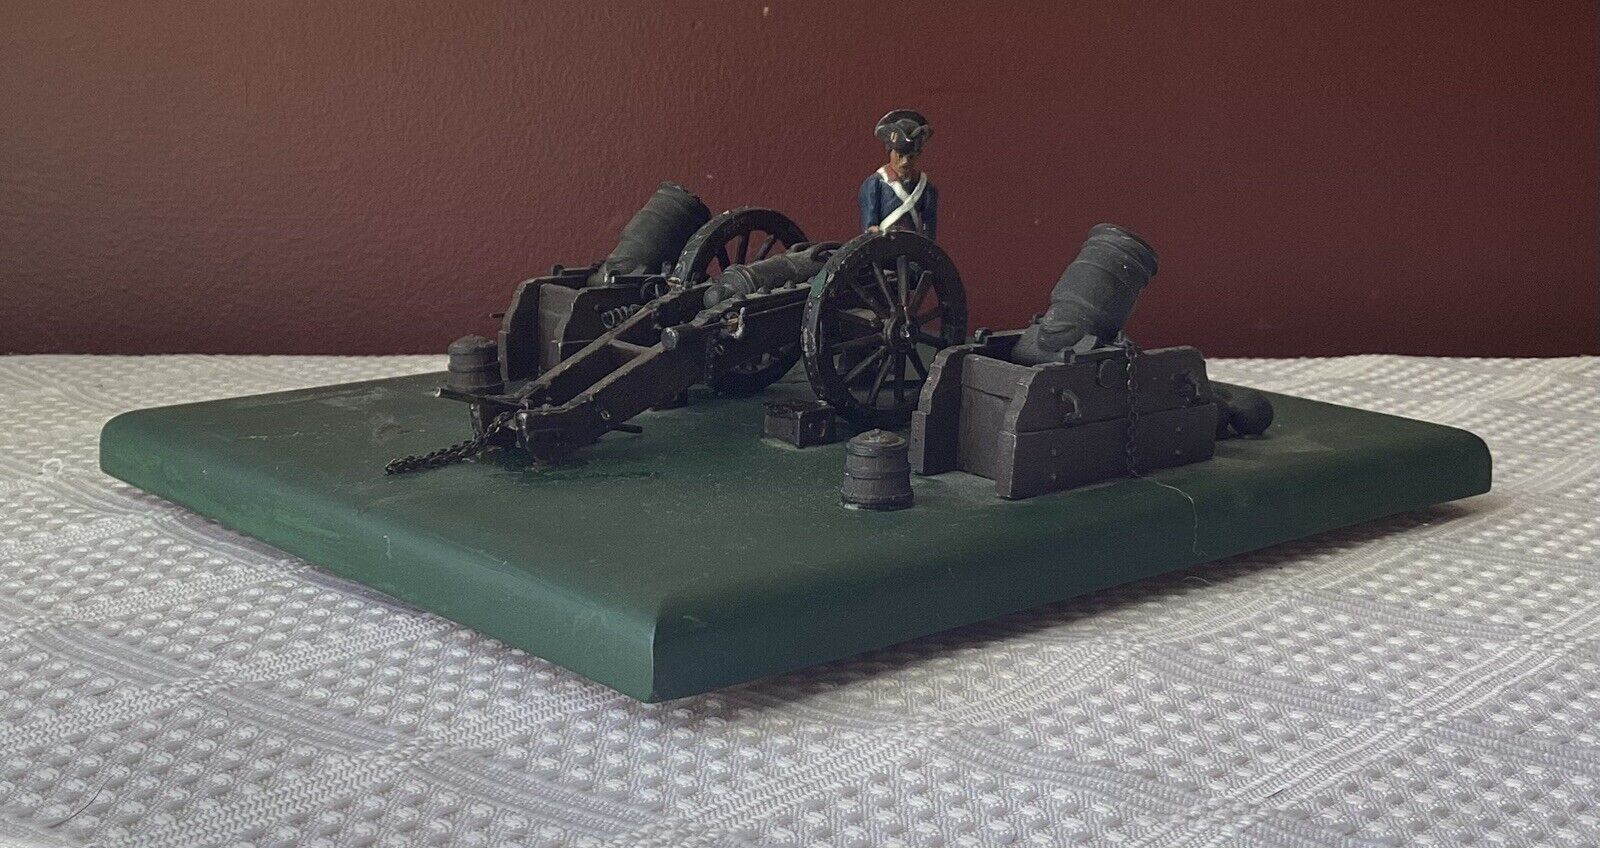 VTG 18th Century Soldier and Cannons Military Model (Metal on Wooden Base)